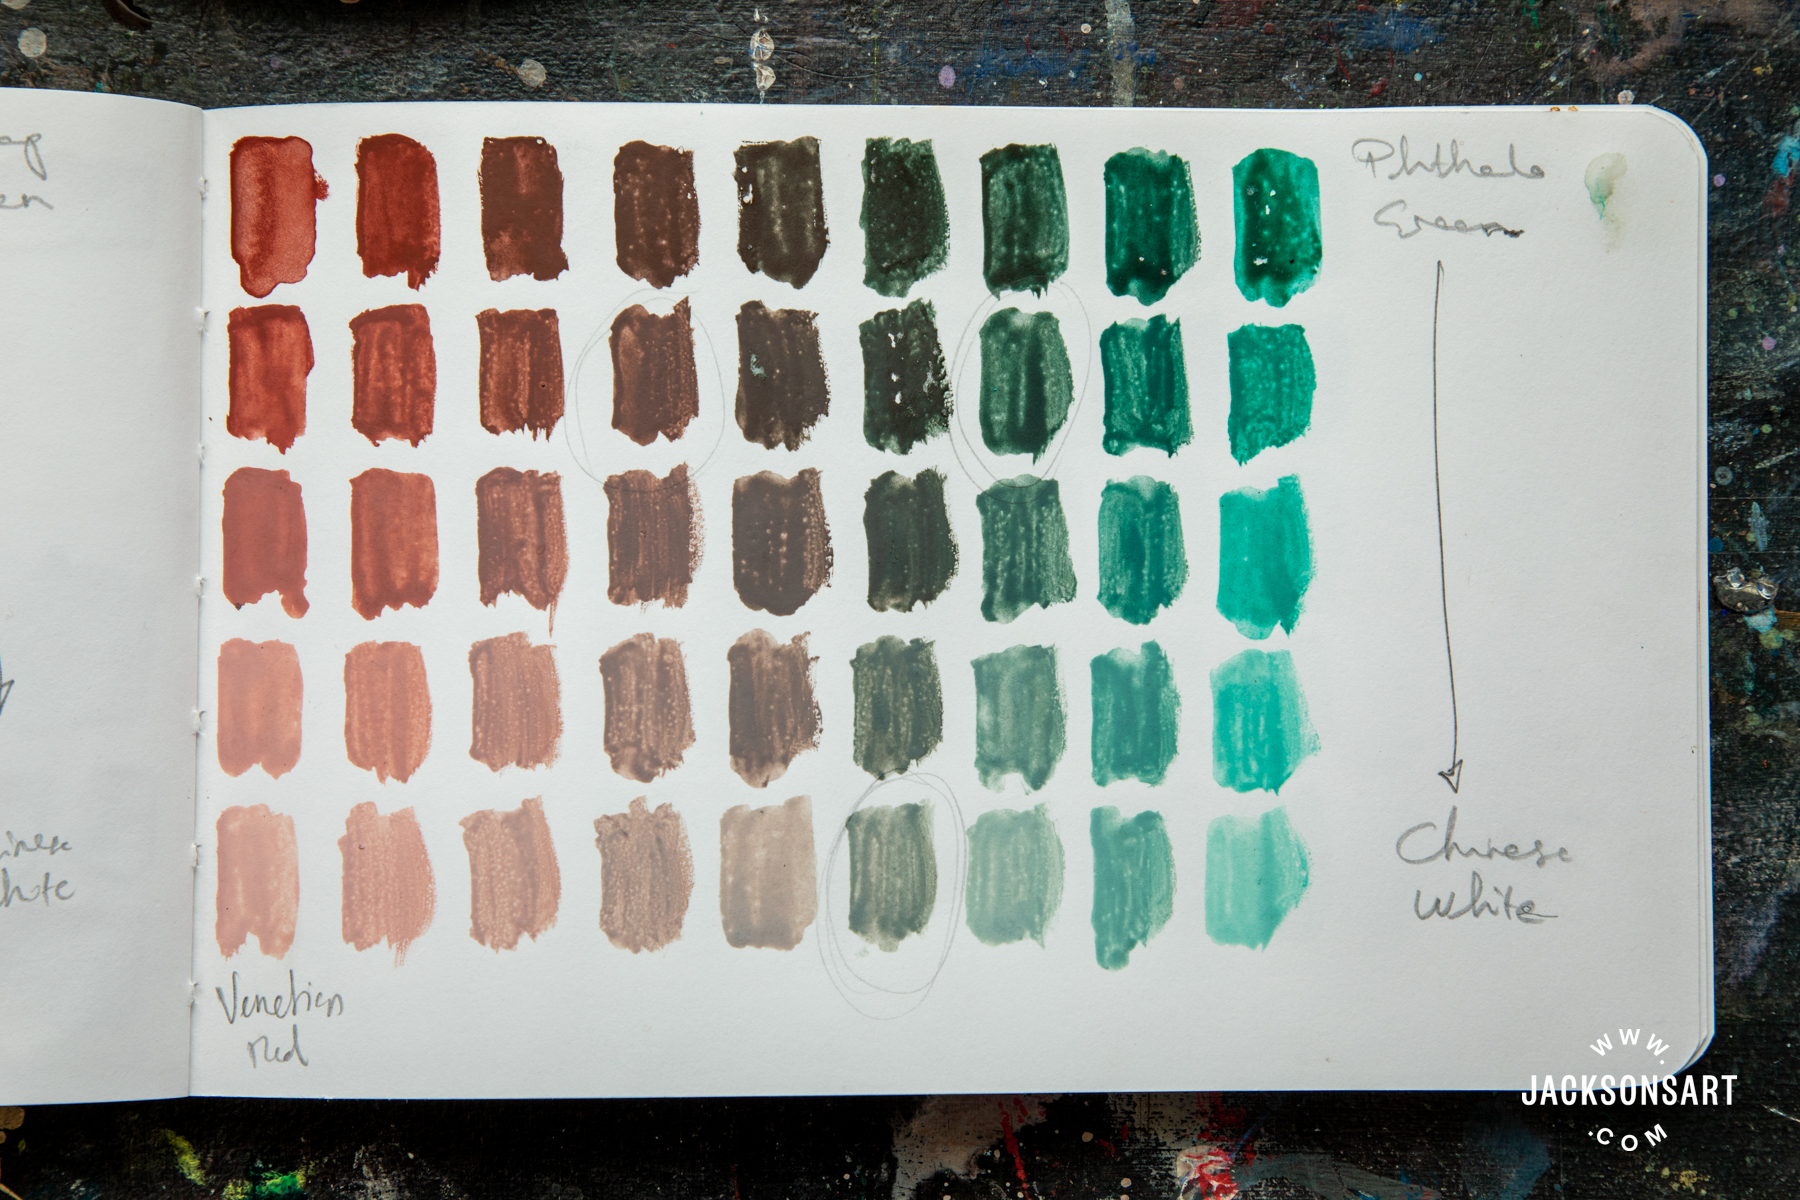 Colour mixing with Phthalo Green